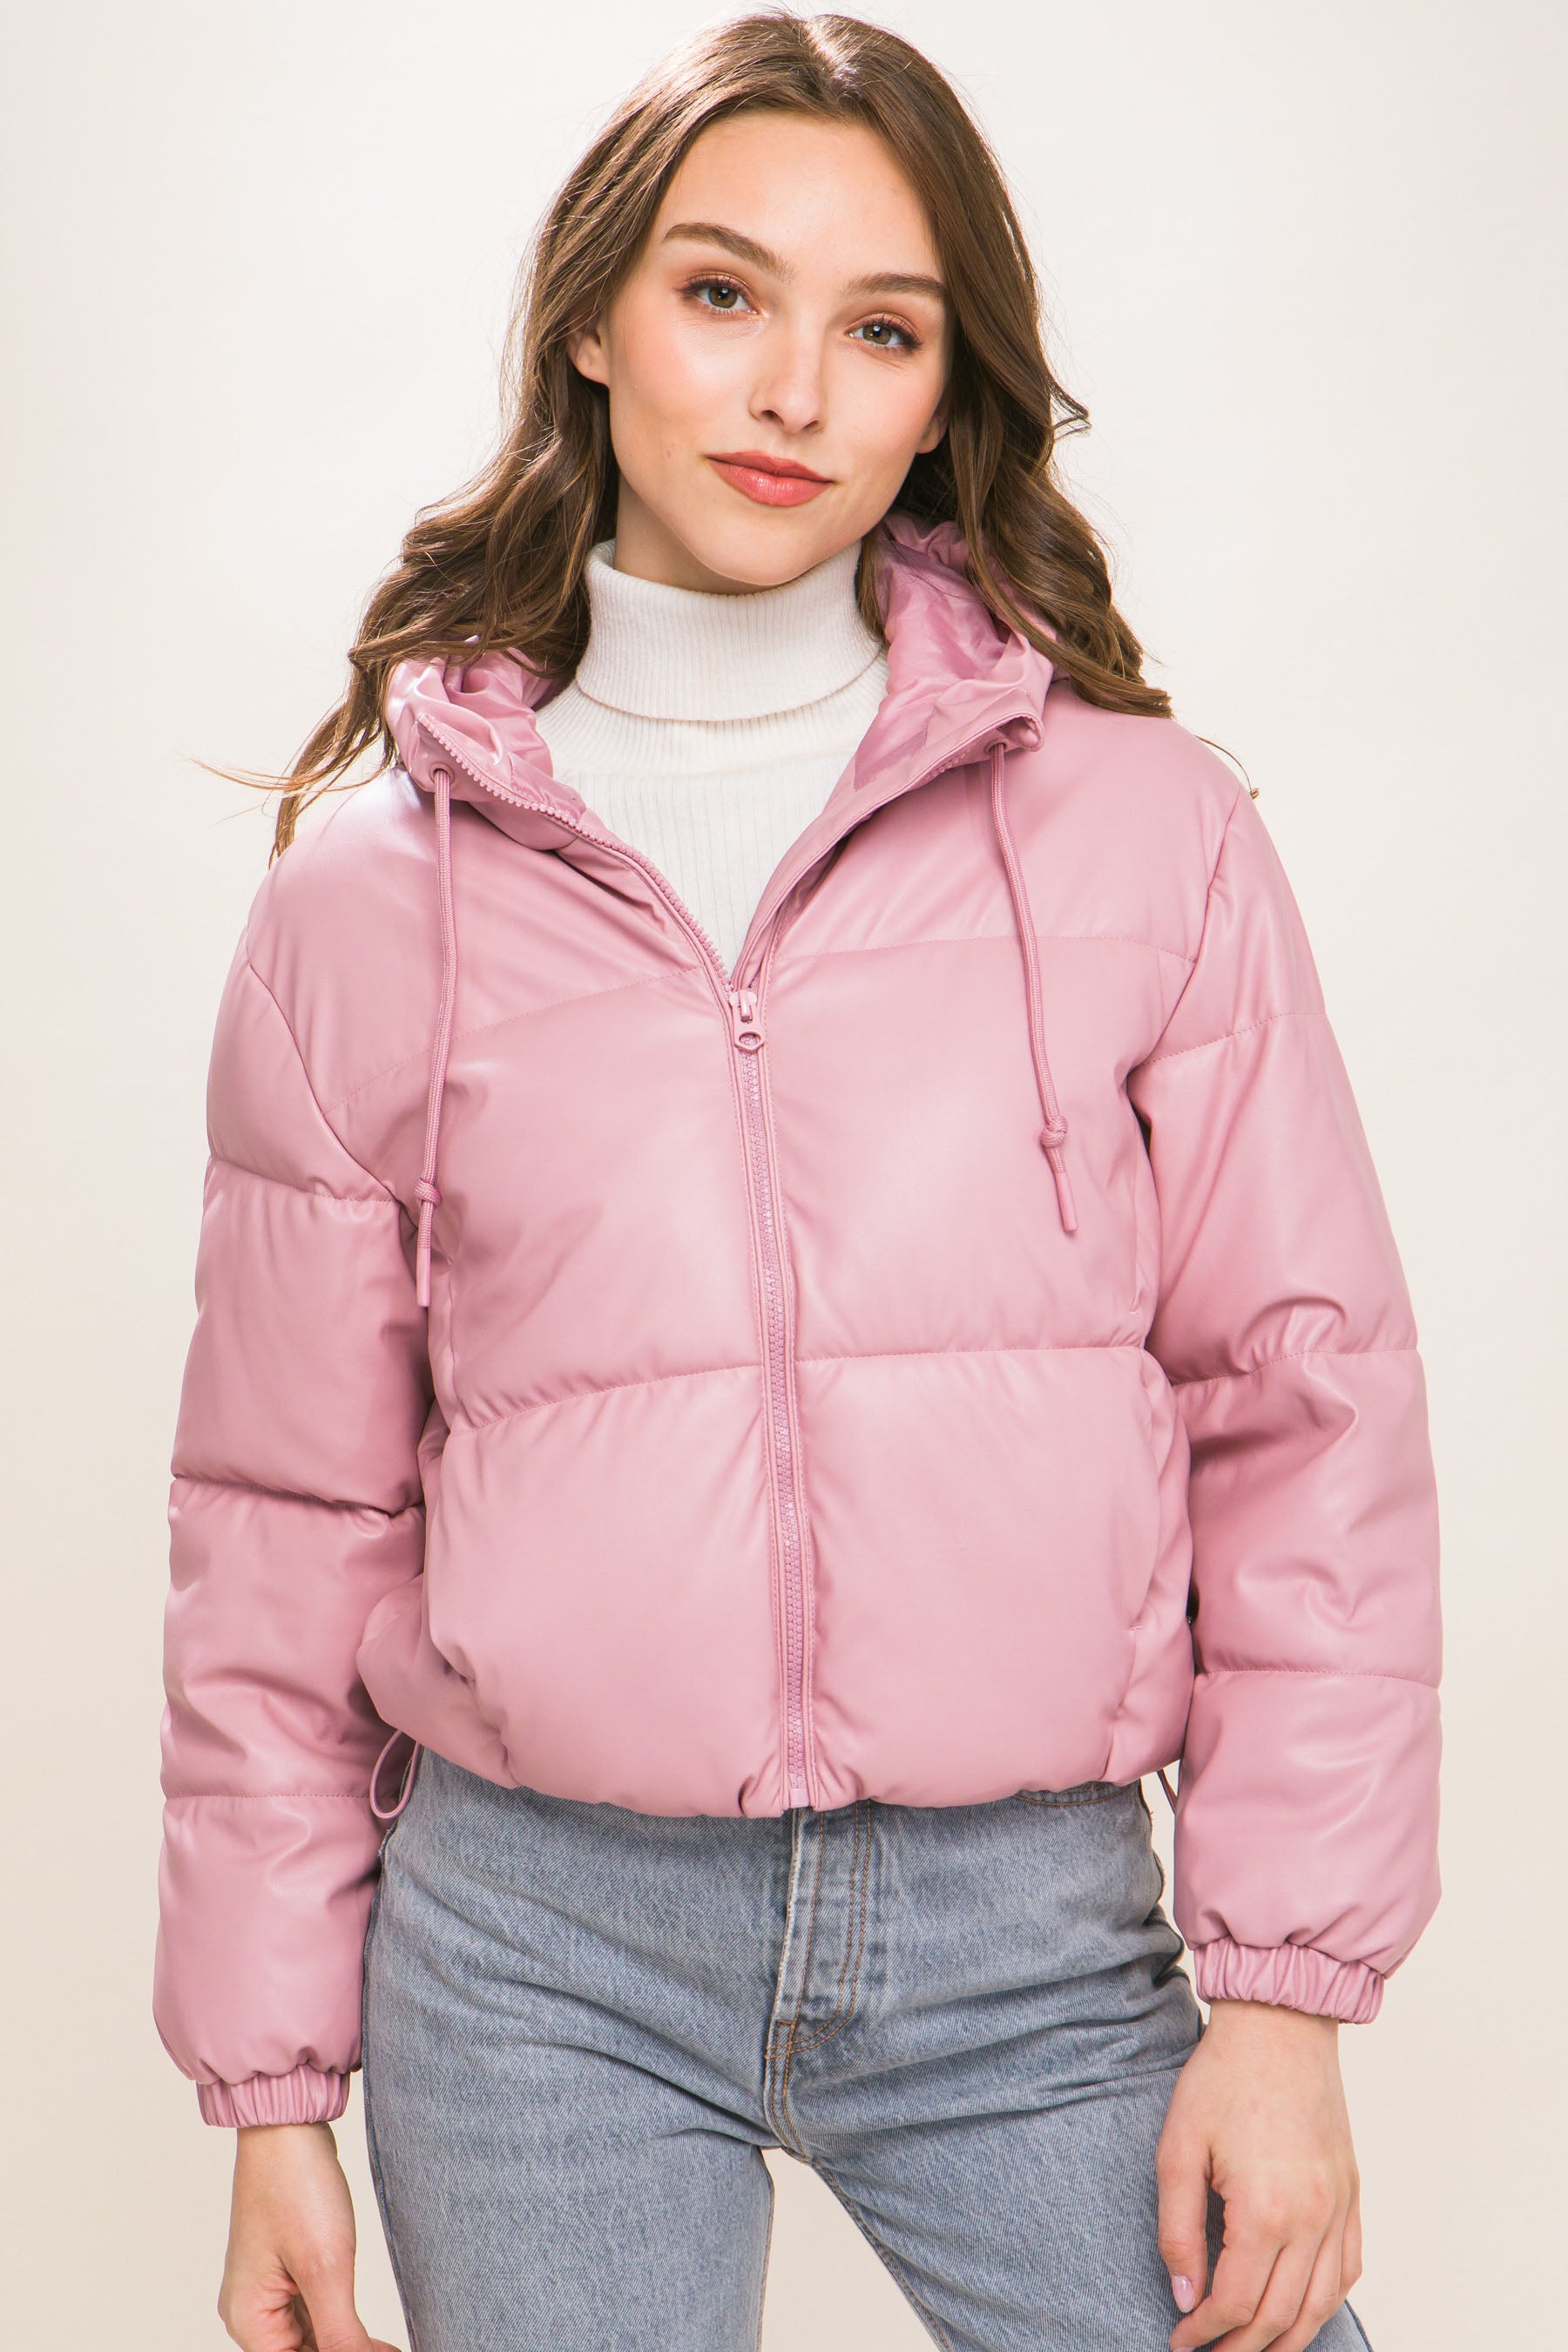 Pink - Pu Faux Leather Zipper Hooded Women's Puffer Jacket - 5 colors - womens coat at TFC&H Co.